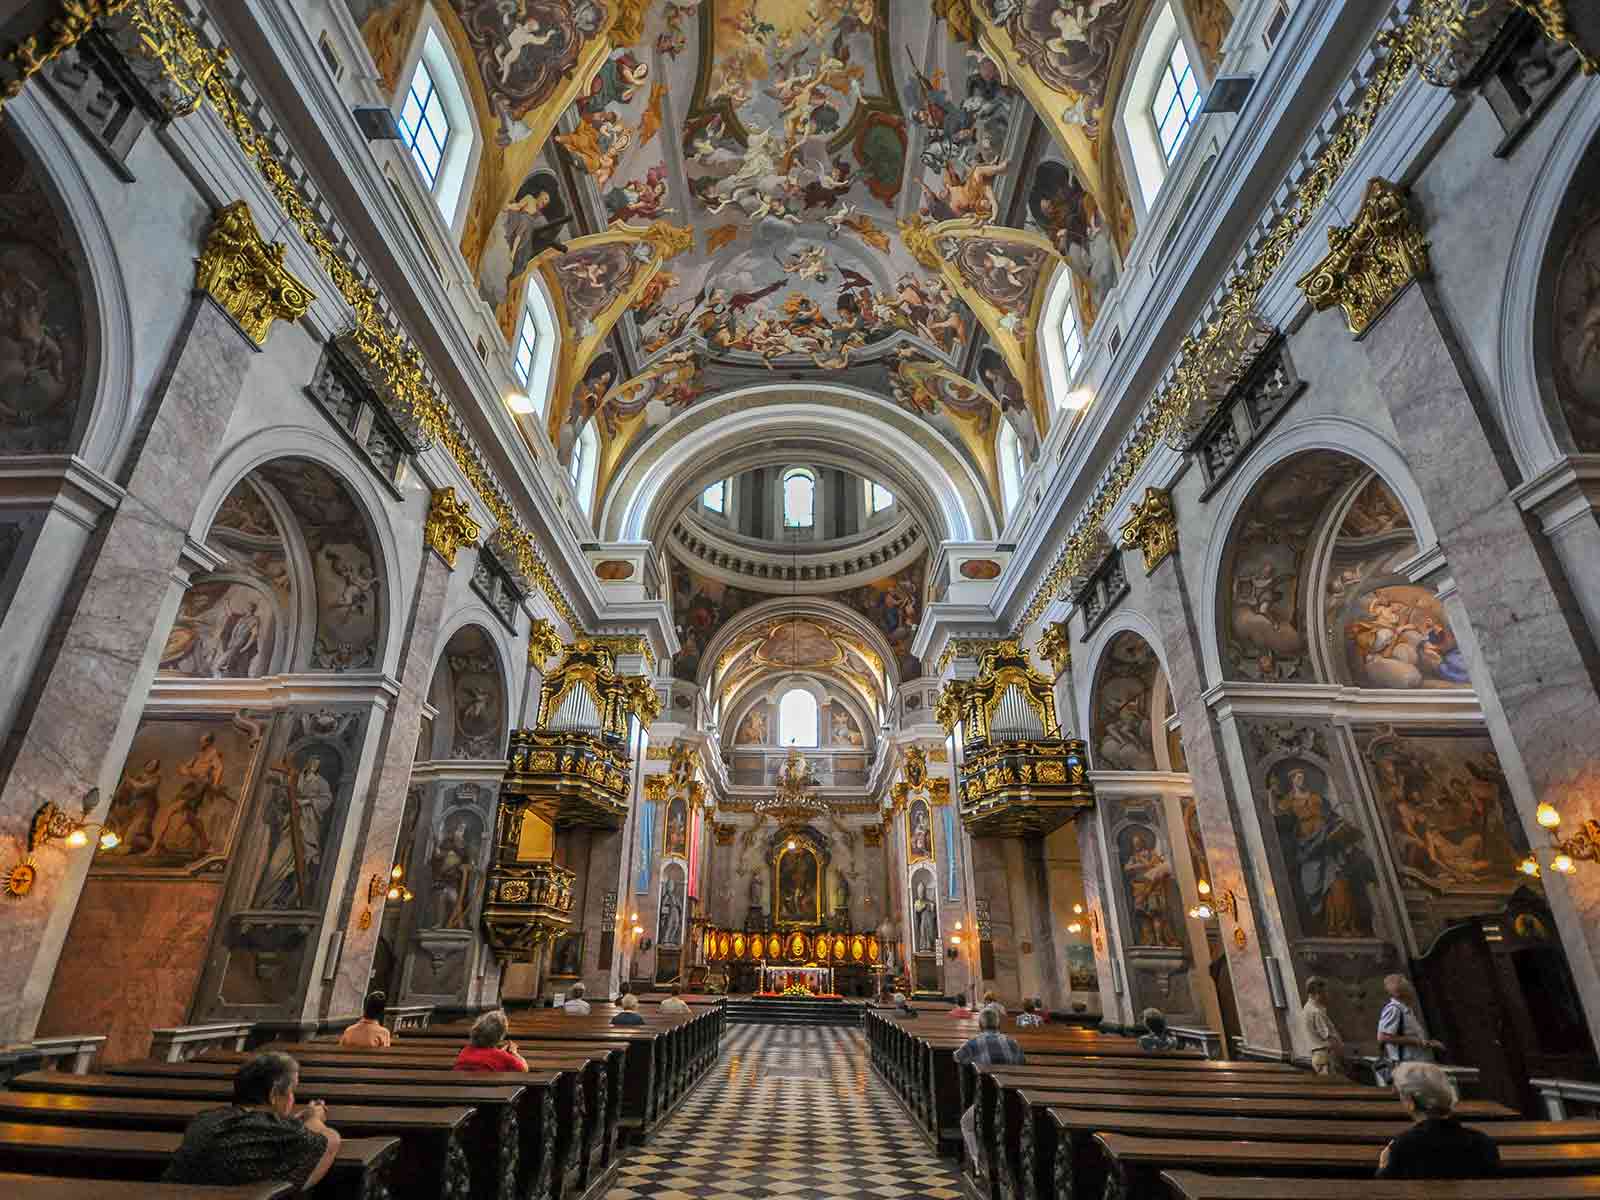 Top 10 things to do in Ljubljana St. Nicholas Cathedral